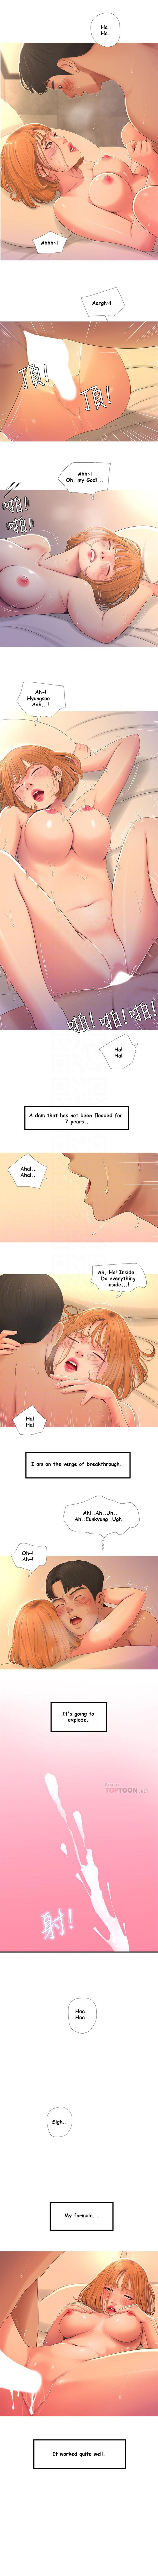 Small One's In-Laws Virgins Chapter 1-6 (Ongoing) [English] Asian Babes - Page 12